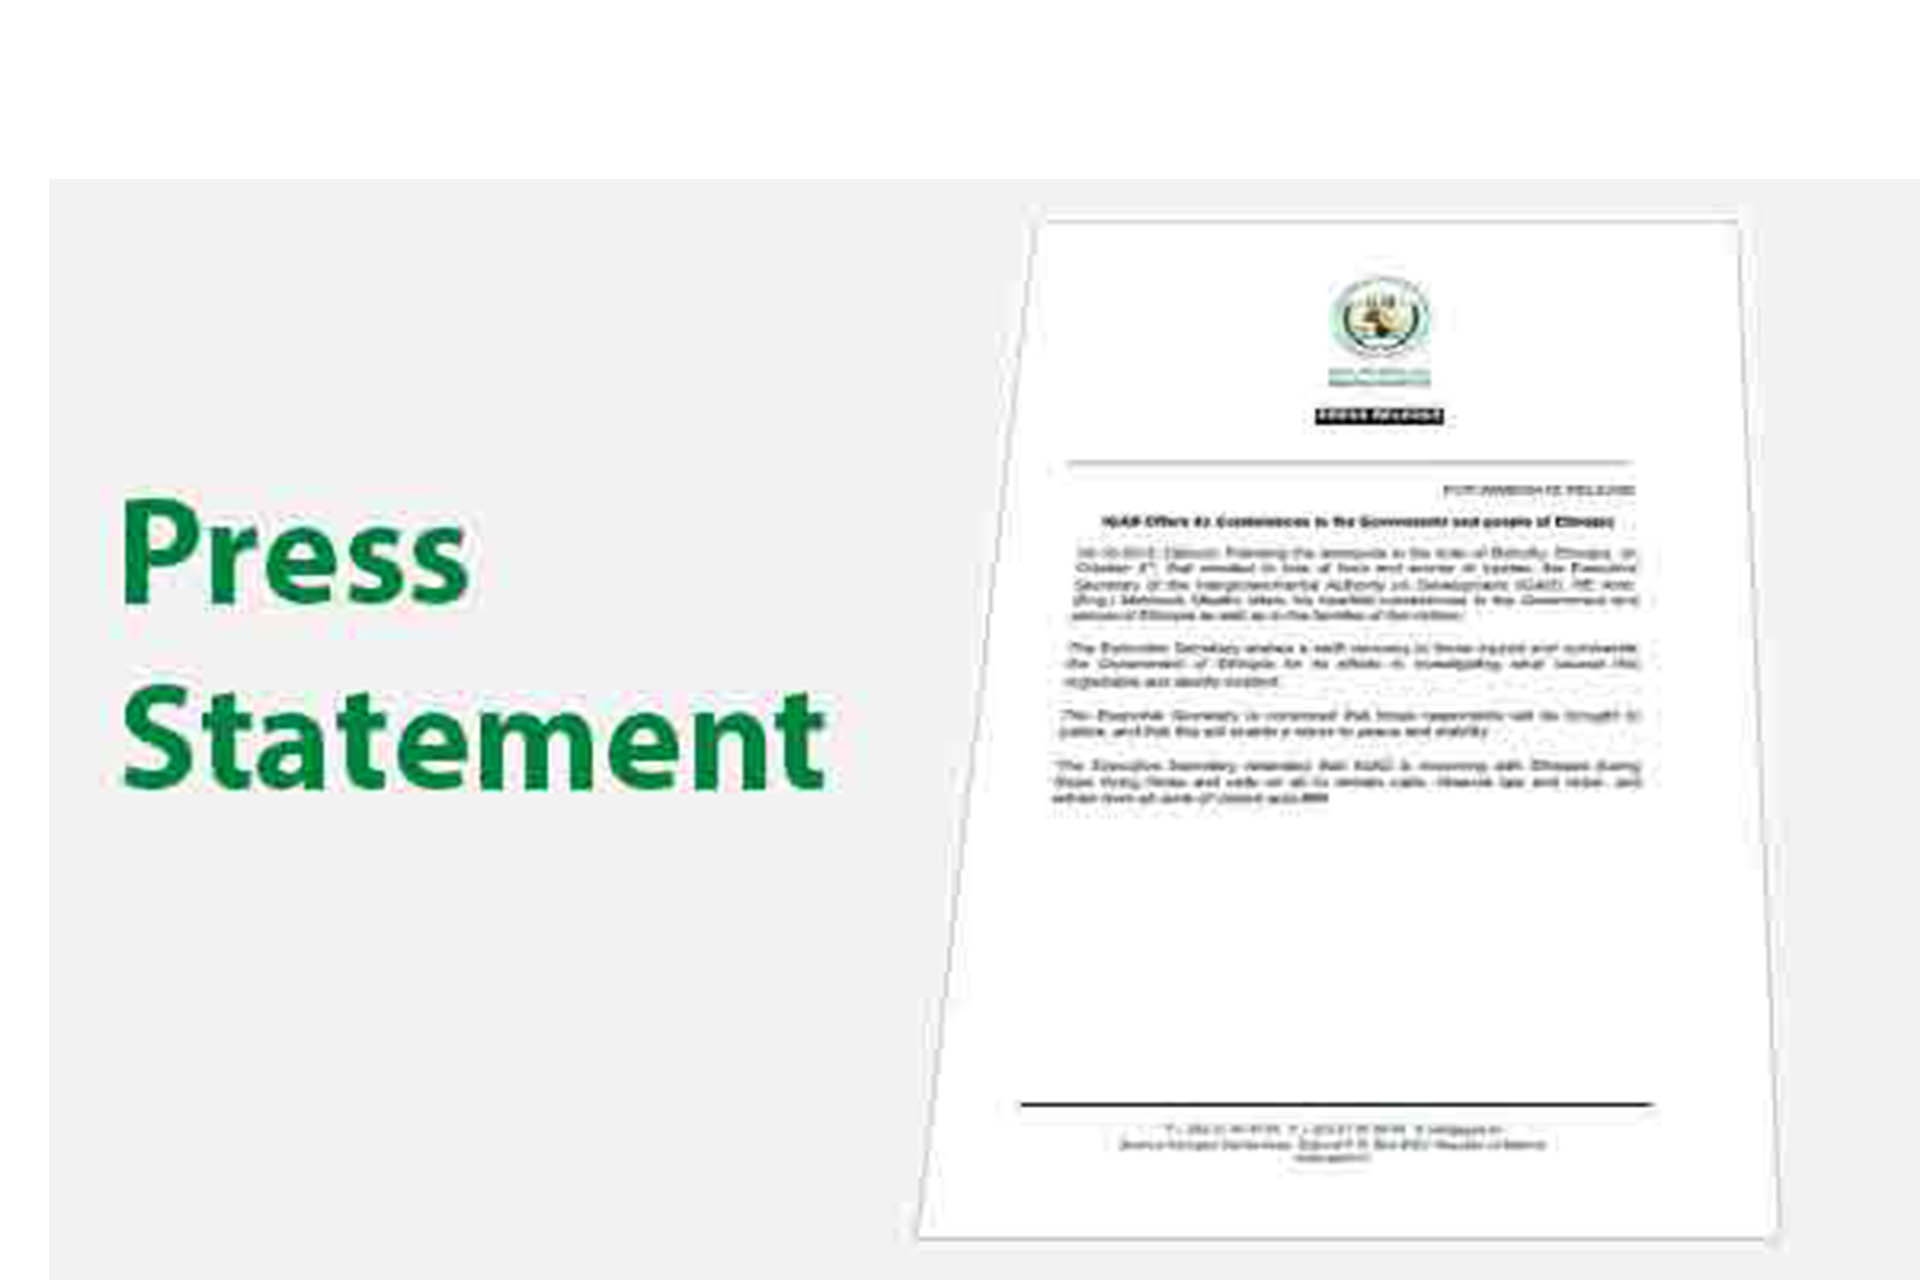 Statement of IGAD on the Situation in Ukraine